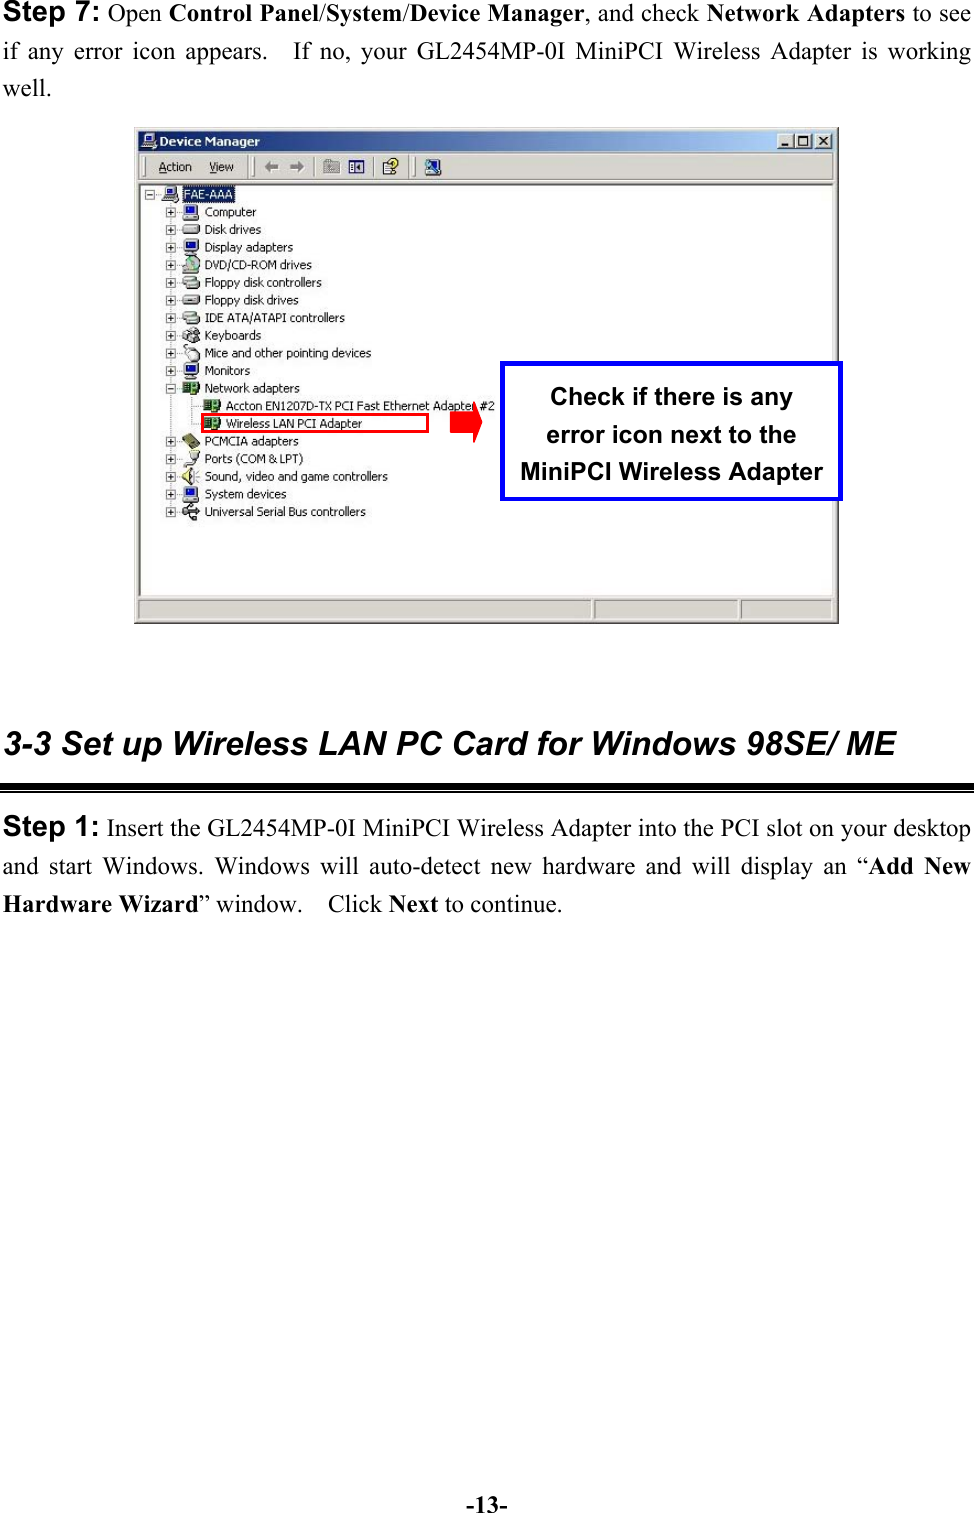 -13-Step 7: Open Control Panel/System/Device Manager, and check Network Adapters to seeif any error icon appears.  If no, your GL2454MP-0I MiniPCI Wireless Adapter is workingwell.  3-3 Set up Wireless LAN PC Card for Windows 98SE/ MEStep 1: Insert the GL2454MP-0I MiniPCI Wireless Adapter into the PCI slot on your desktopand start Windows. Windows will auto-detect new hardware and will display an “Add NewHardware Wizard” window.  Click Next to continue.Check if there is anyerror icon next to theMiniPCI Wireless Adapter